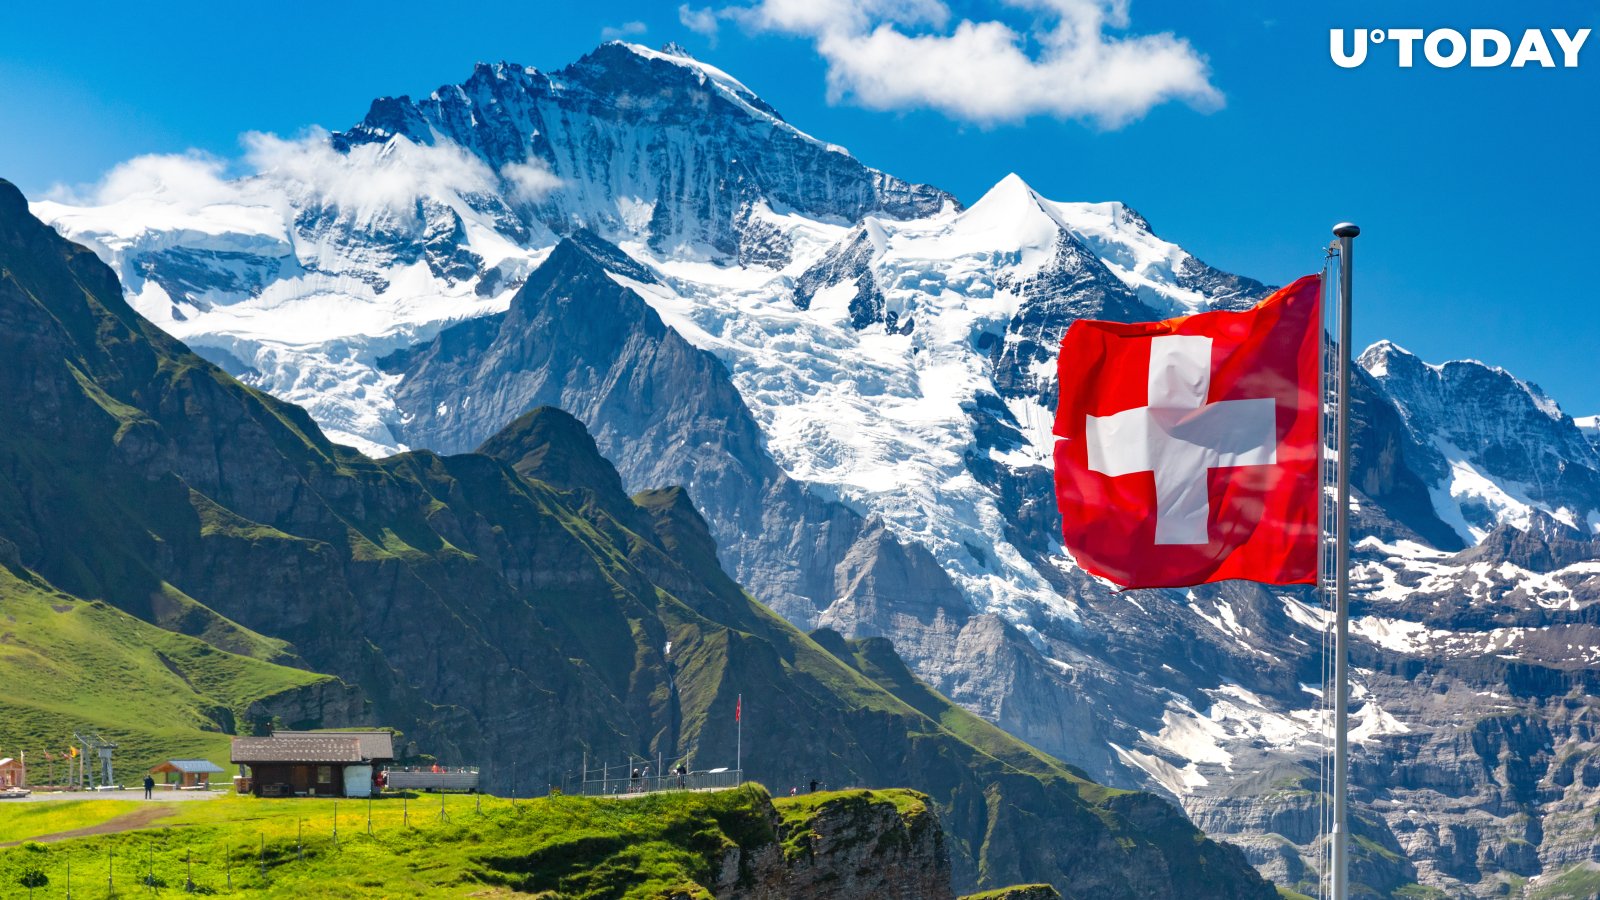 5-Star Hotel in Swiss Alps Starts Accepting Bitcoin and Ethereum